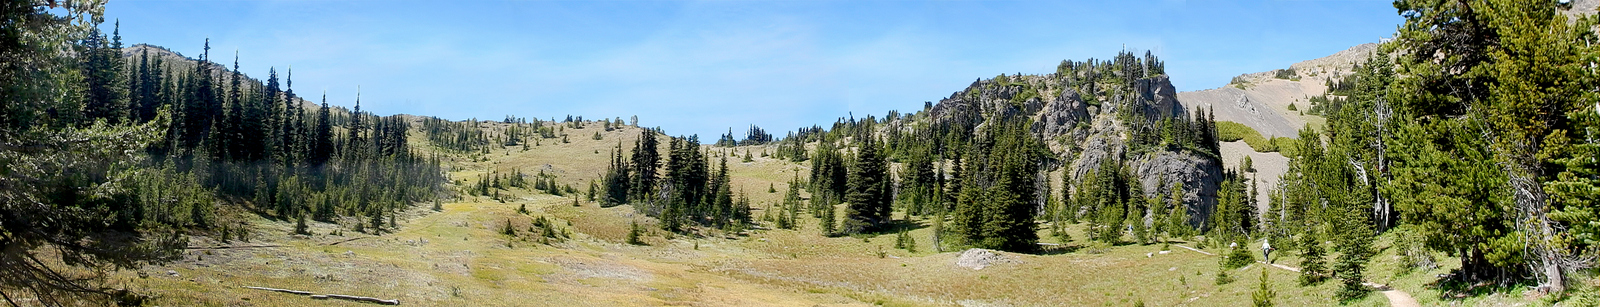  The low spot in the middle of the photo is Marmot Pass 